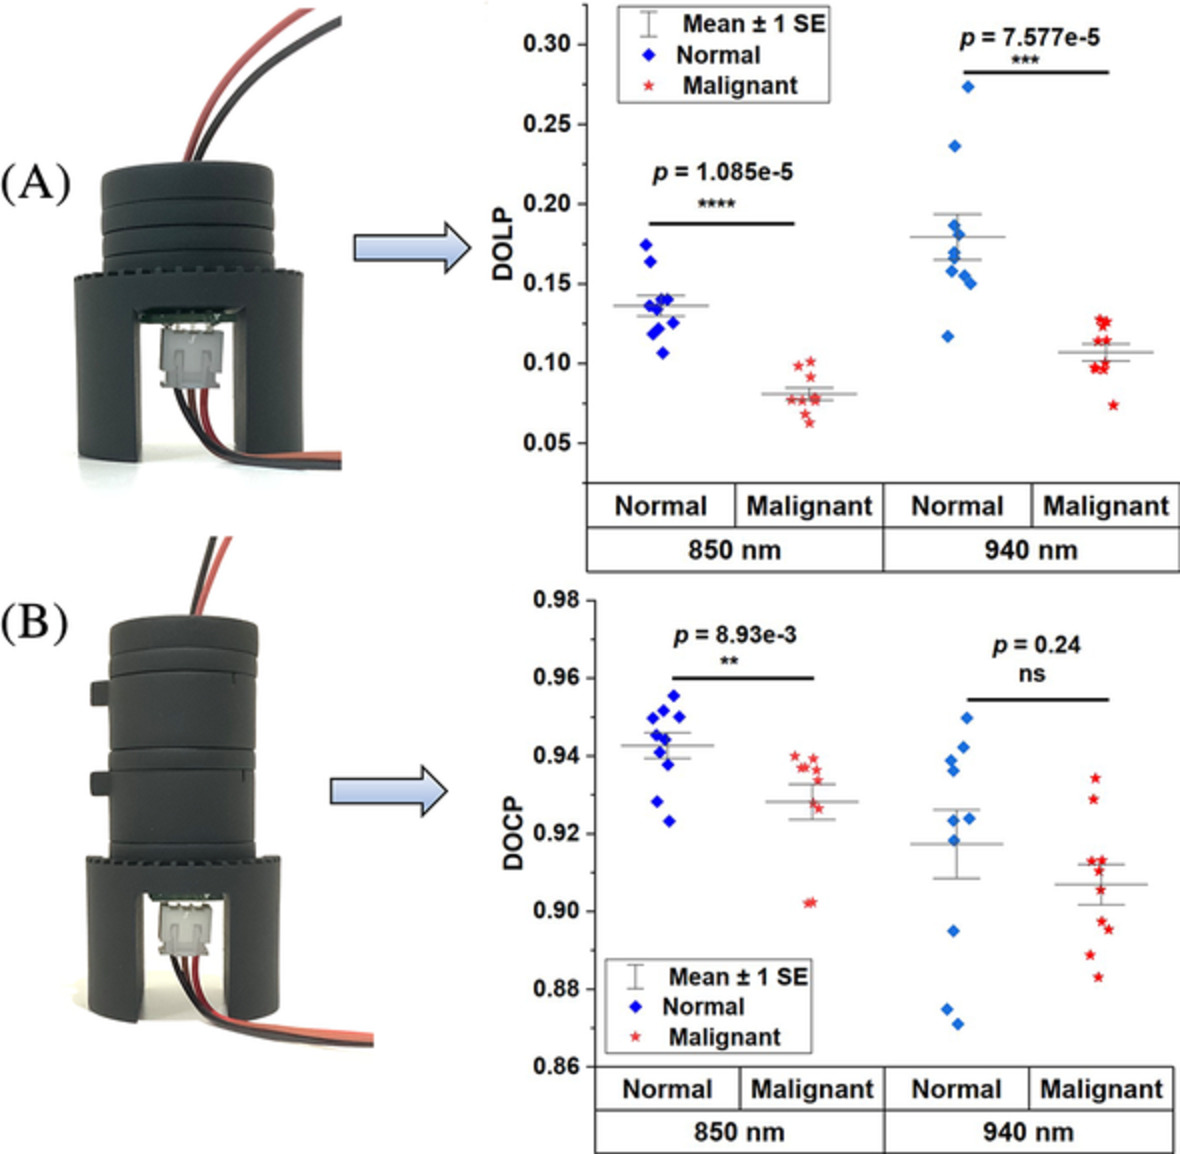 Toward the development of portable light emitting diode‐based polarization spectroscopy tools for breast cancer diagnosis